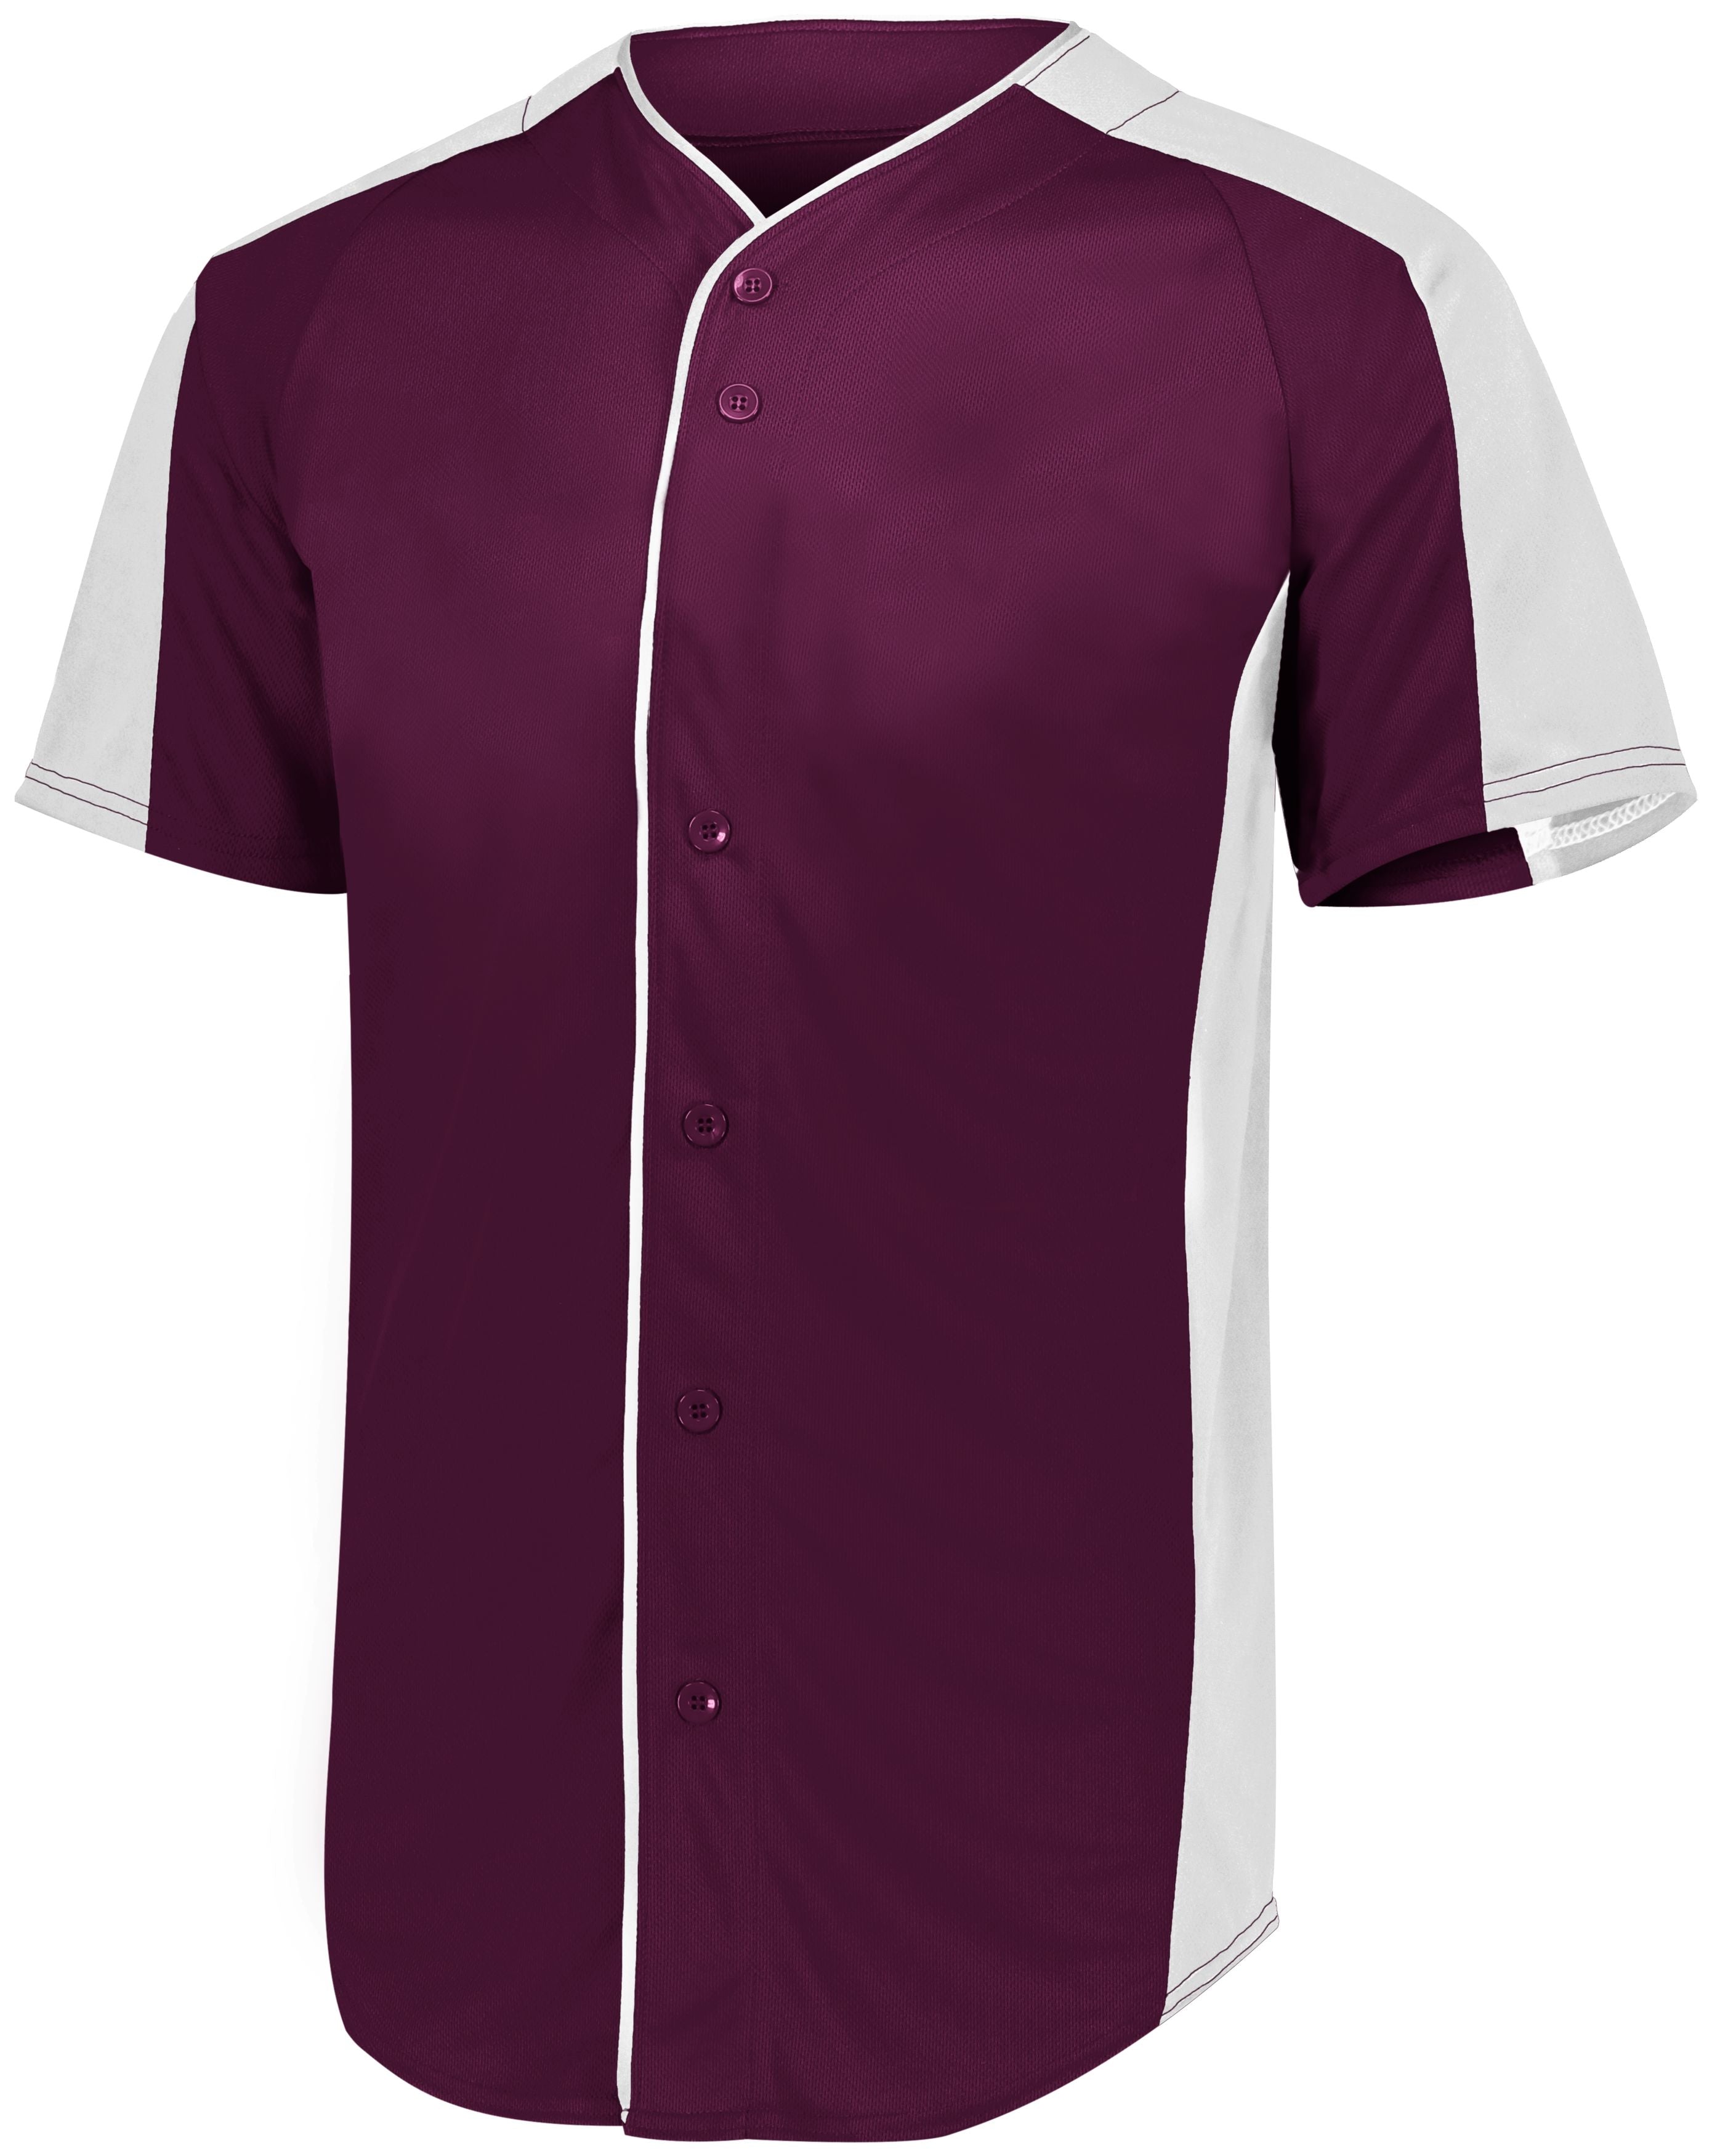 Augusta Sportswear Full-Button Baseball Jersey in Maroon/White  -Part of the Adult, Adult-Jersey, Augusta-Products, Baseball, Shirts, All-Sports, All-Sports-1 product lines at KanaleyCreations.com